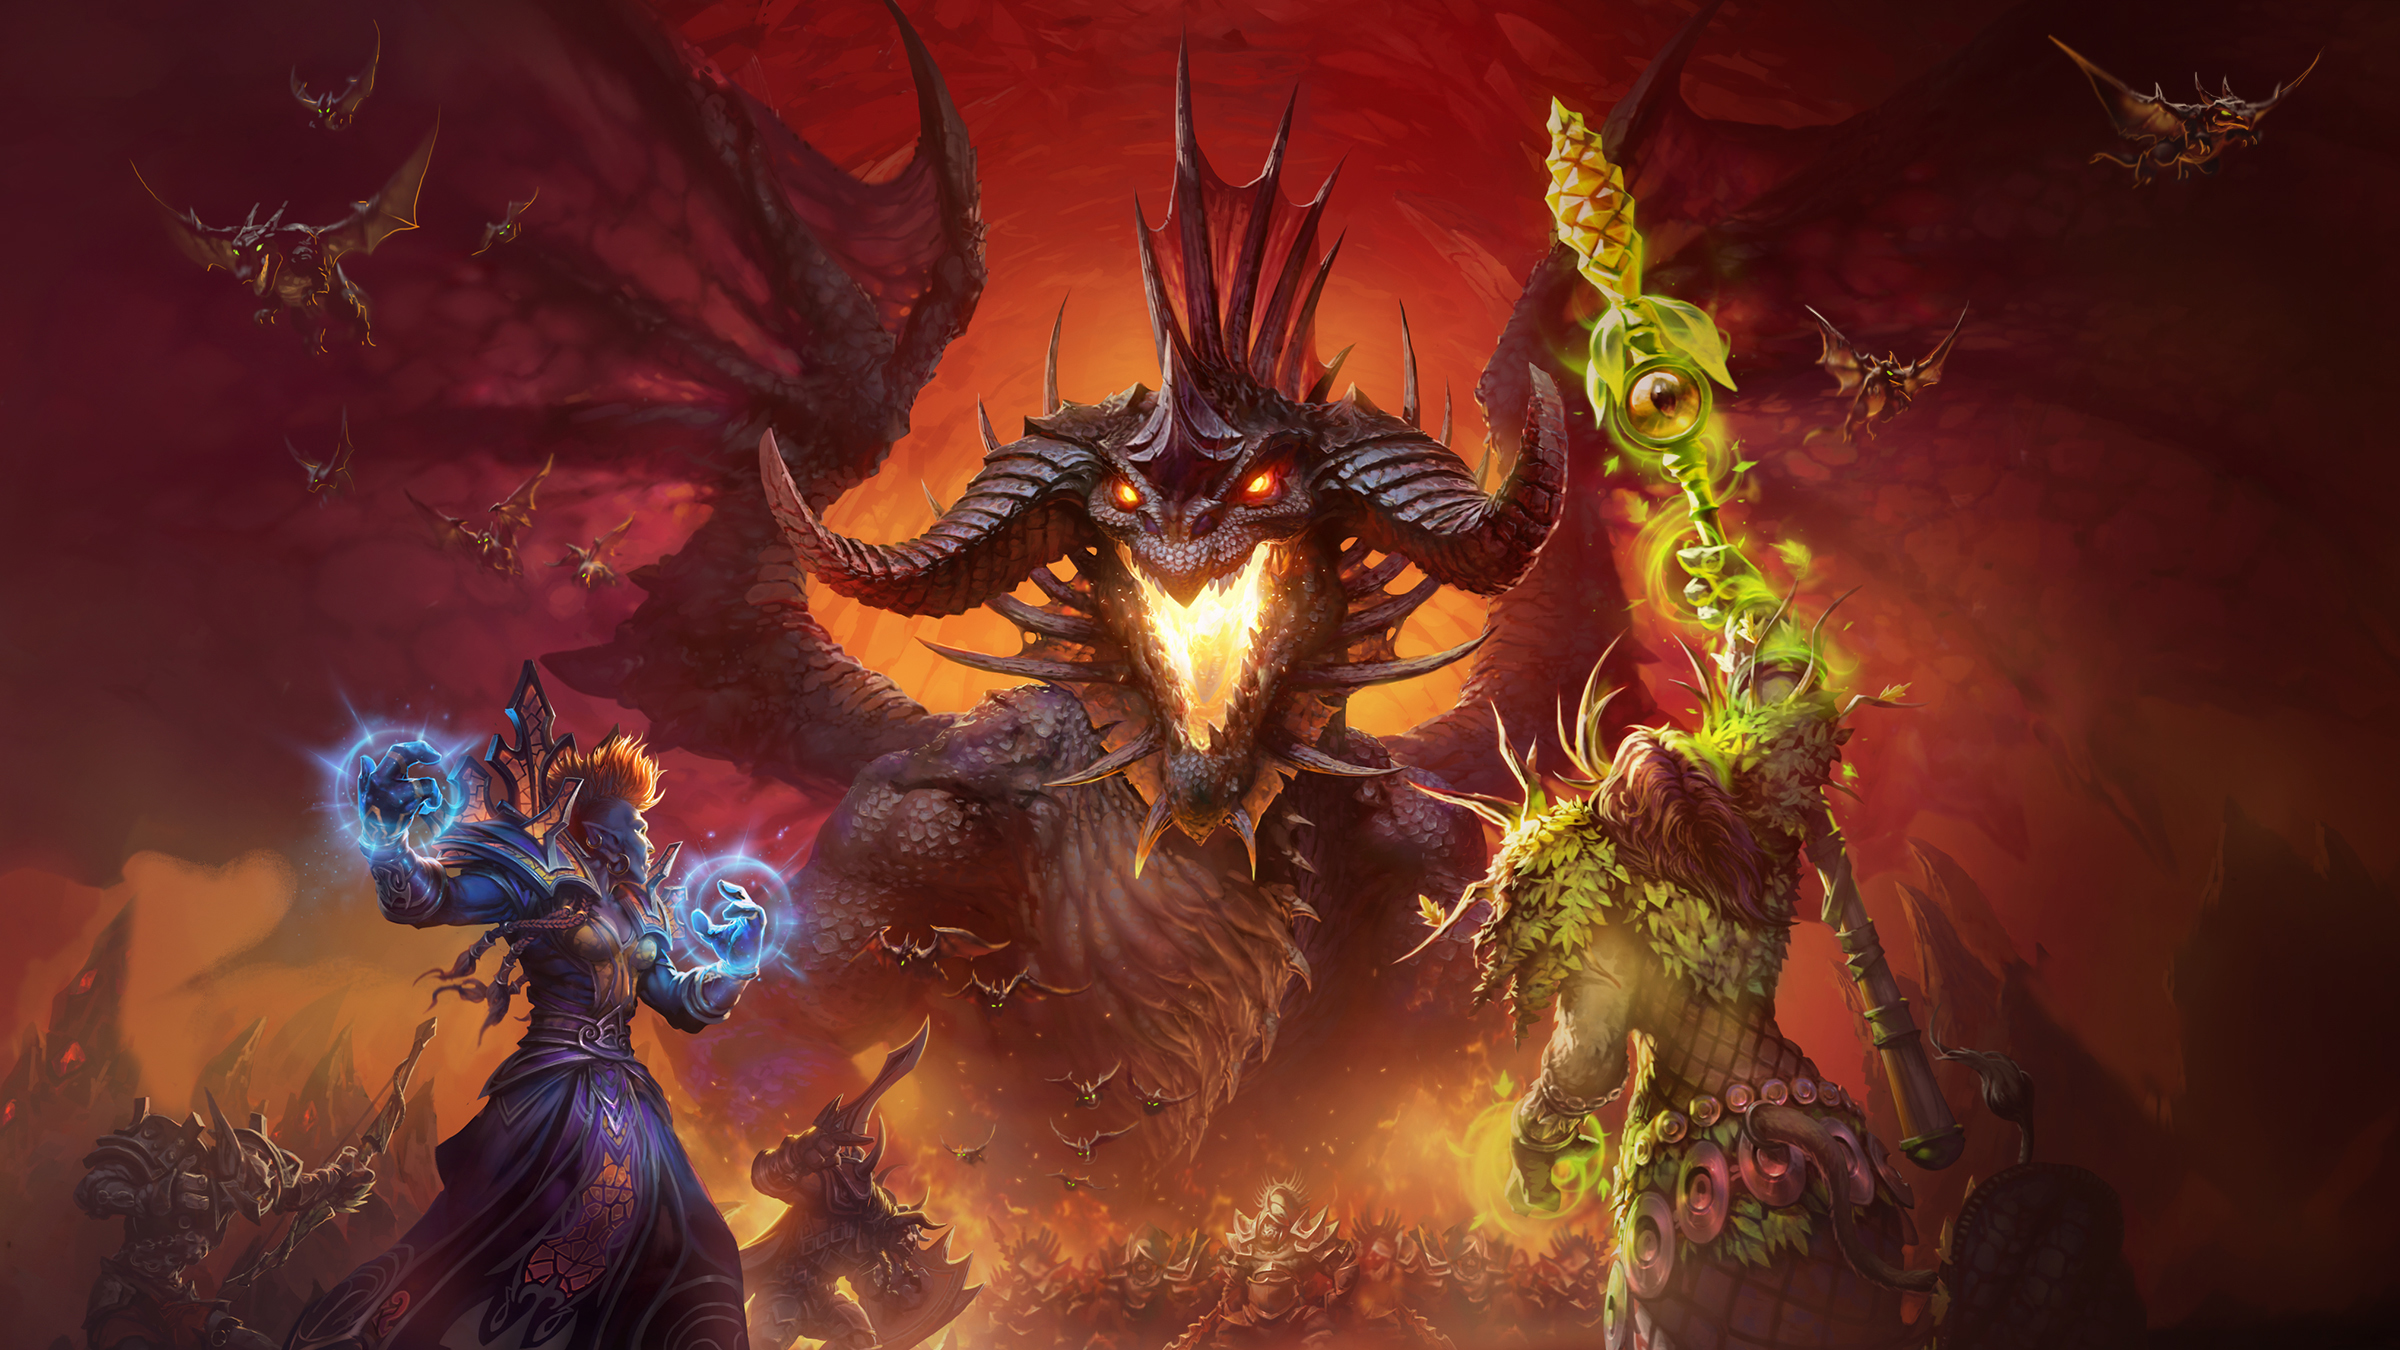 Will subscription games like World of Warcraft become part of Game Pass, too?